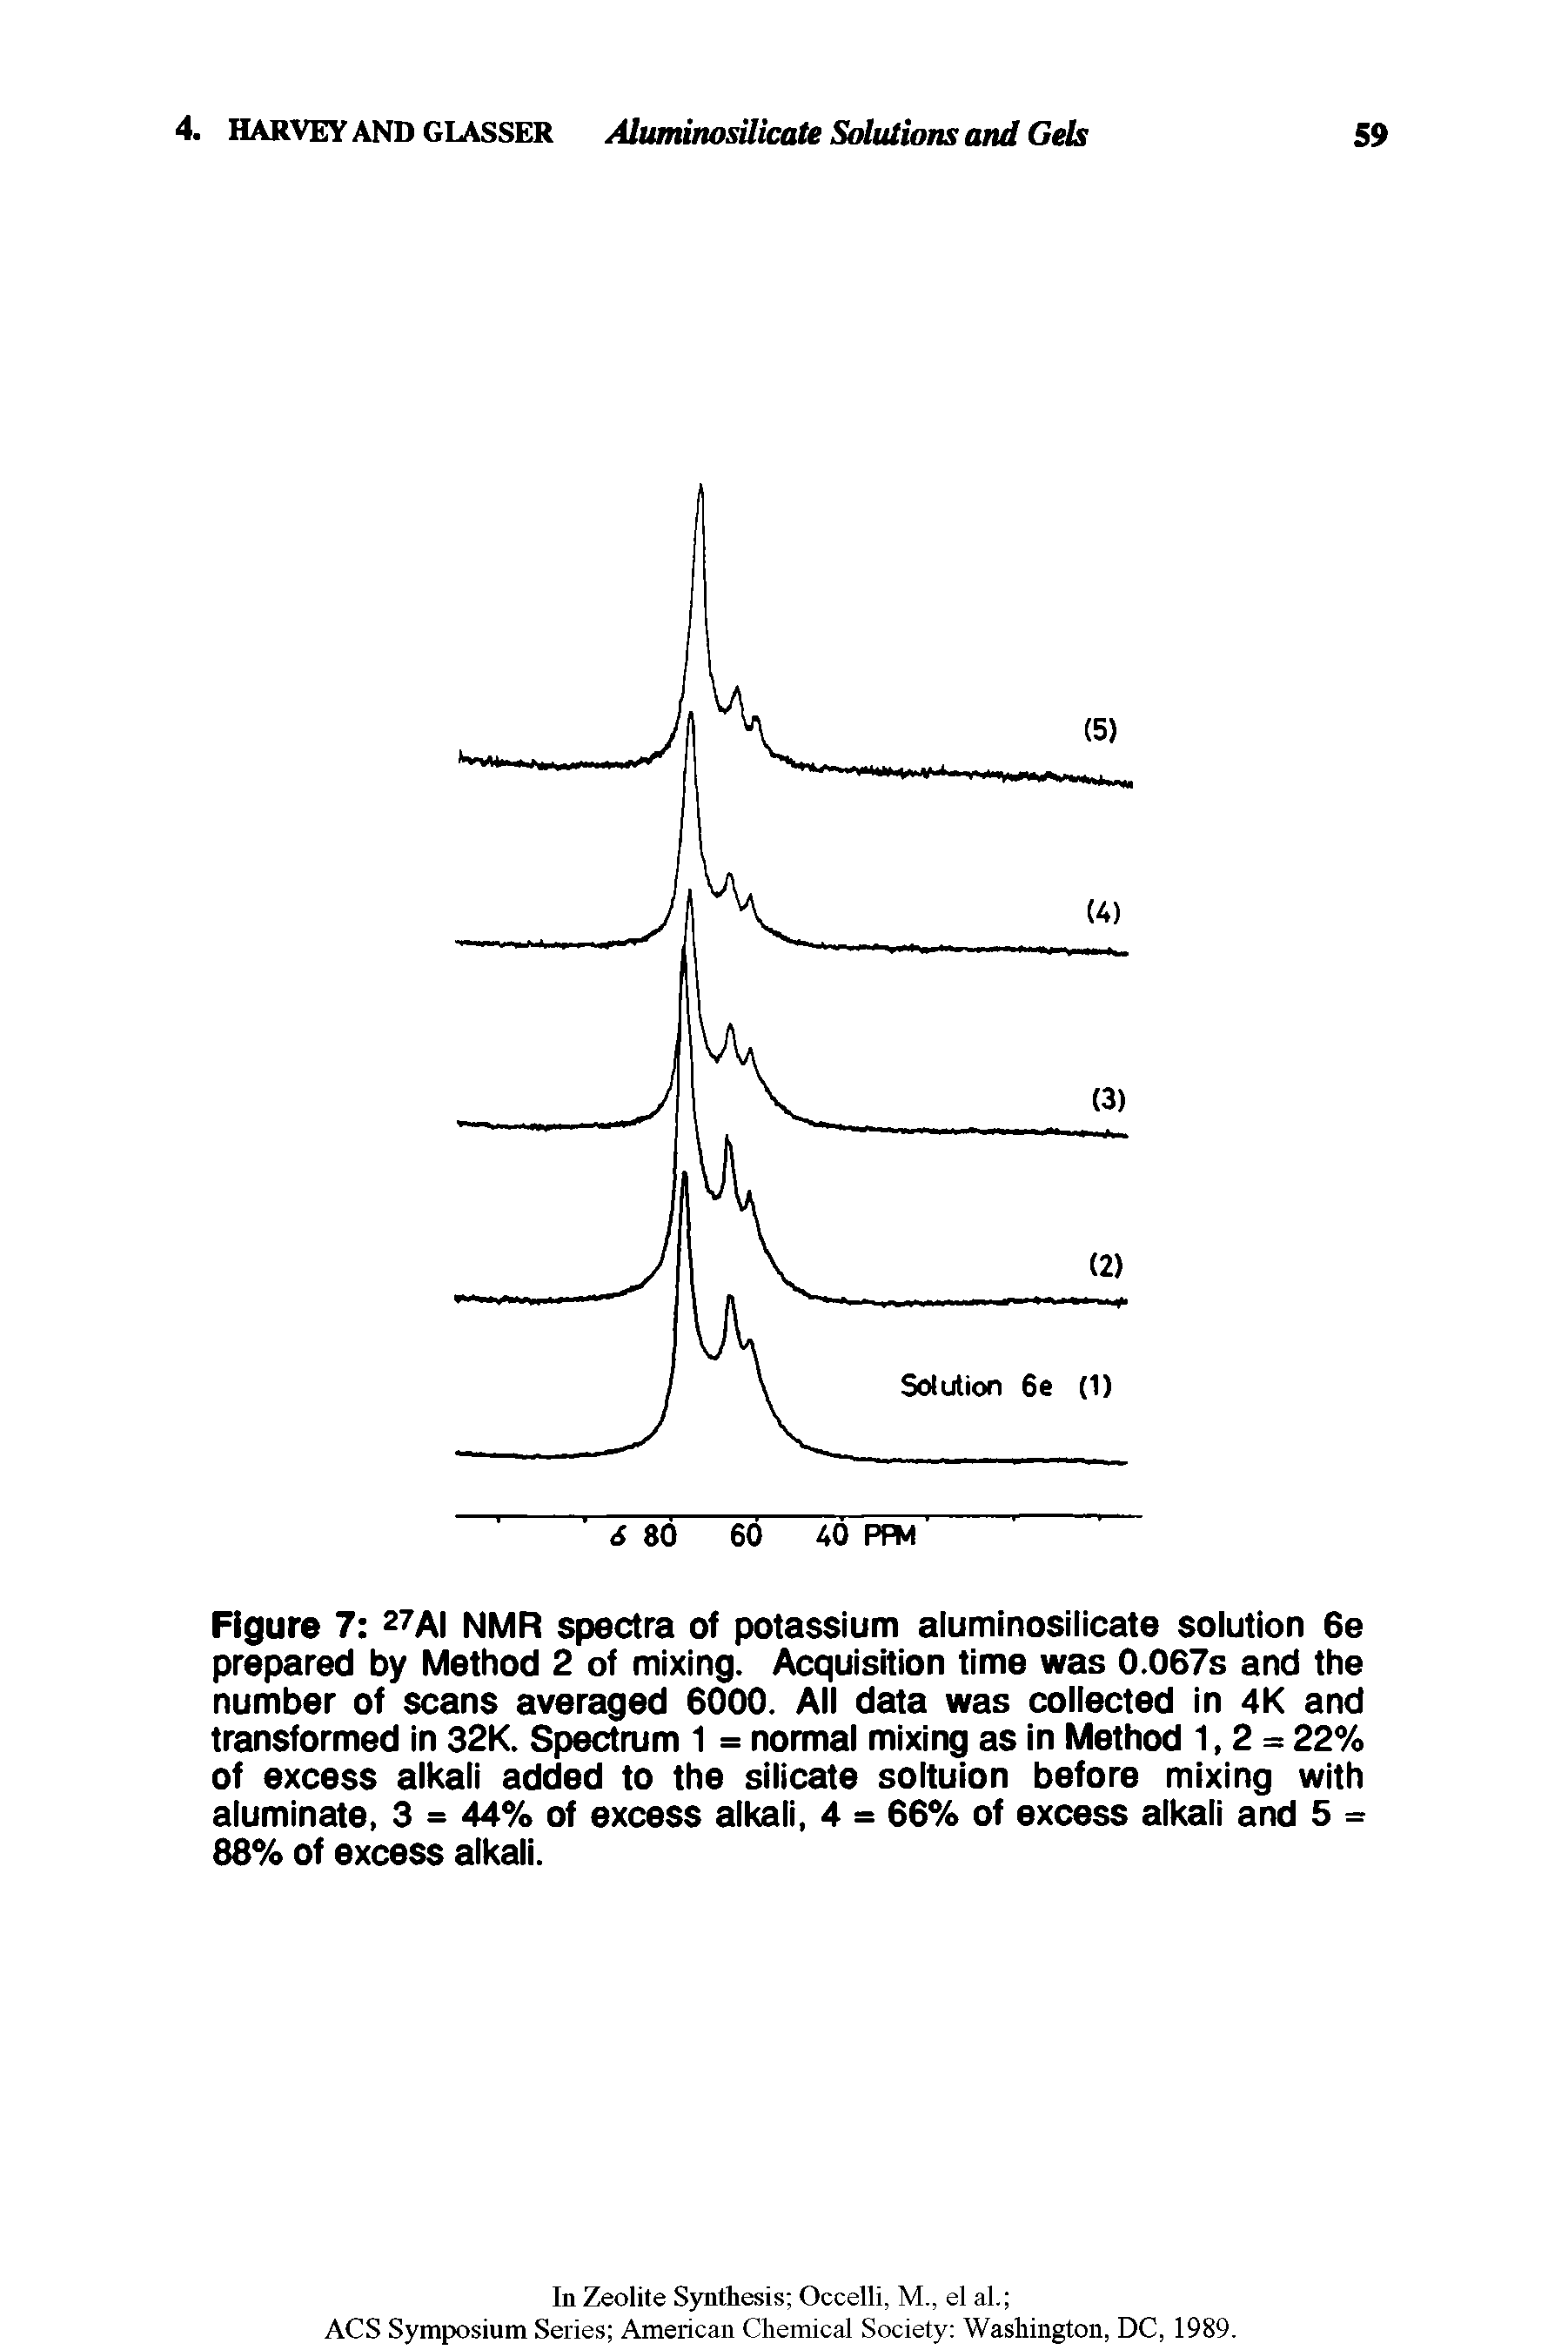 Figure 7 27Al NMR spectra of potassium aluminosilicate solution 6e prepared by Method 2 of mixing. Acquisition time was 0.067s and the number of scans averaged 6000. All data was collected in 4K and transformed in 32K. Spectrum 1 = normal mixing as in Method 1,2 = 22% of excess alkali added to the silicate soltuion before mixing with aluminate, 3 = 44% of excess alkali, 4 = 66% of excess alkali and 5 = 88% of excess alkali.